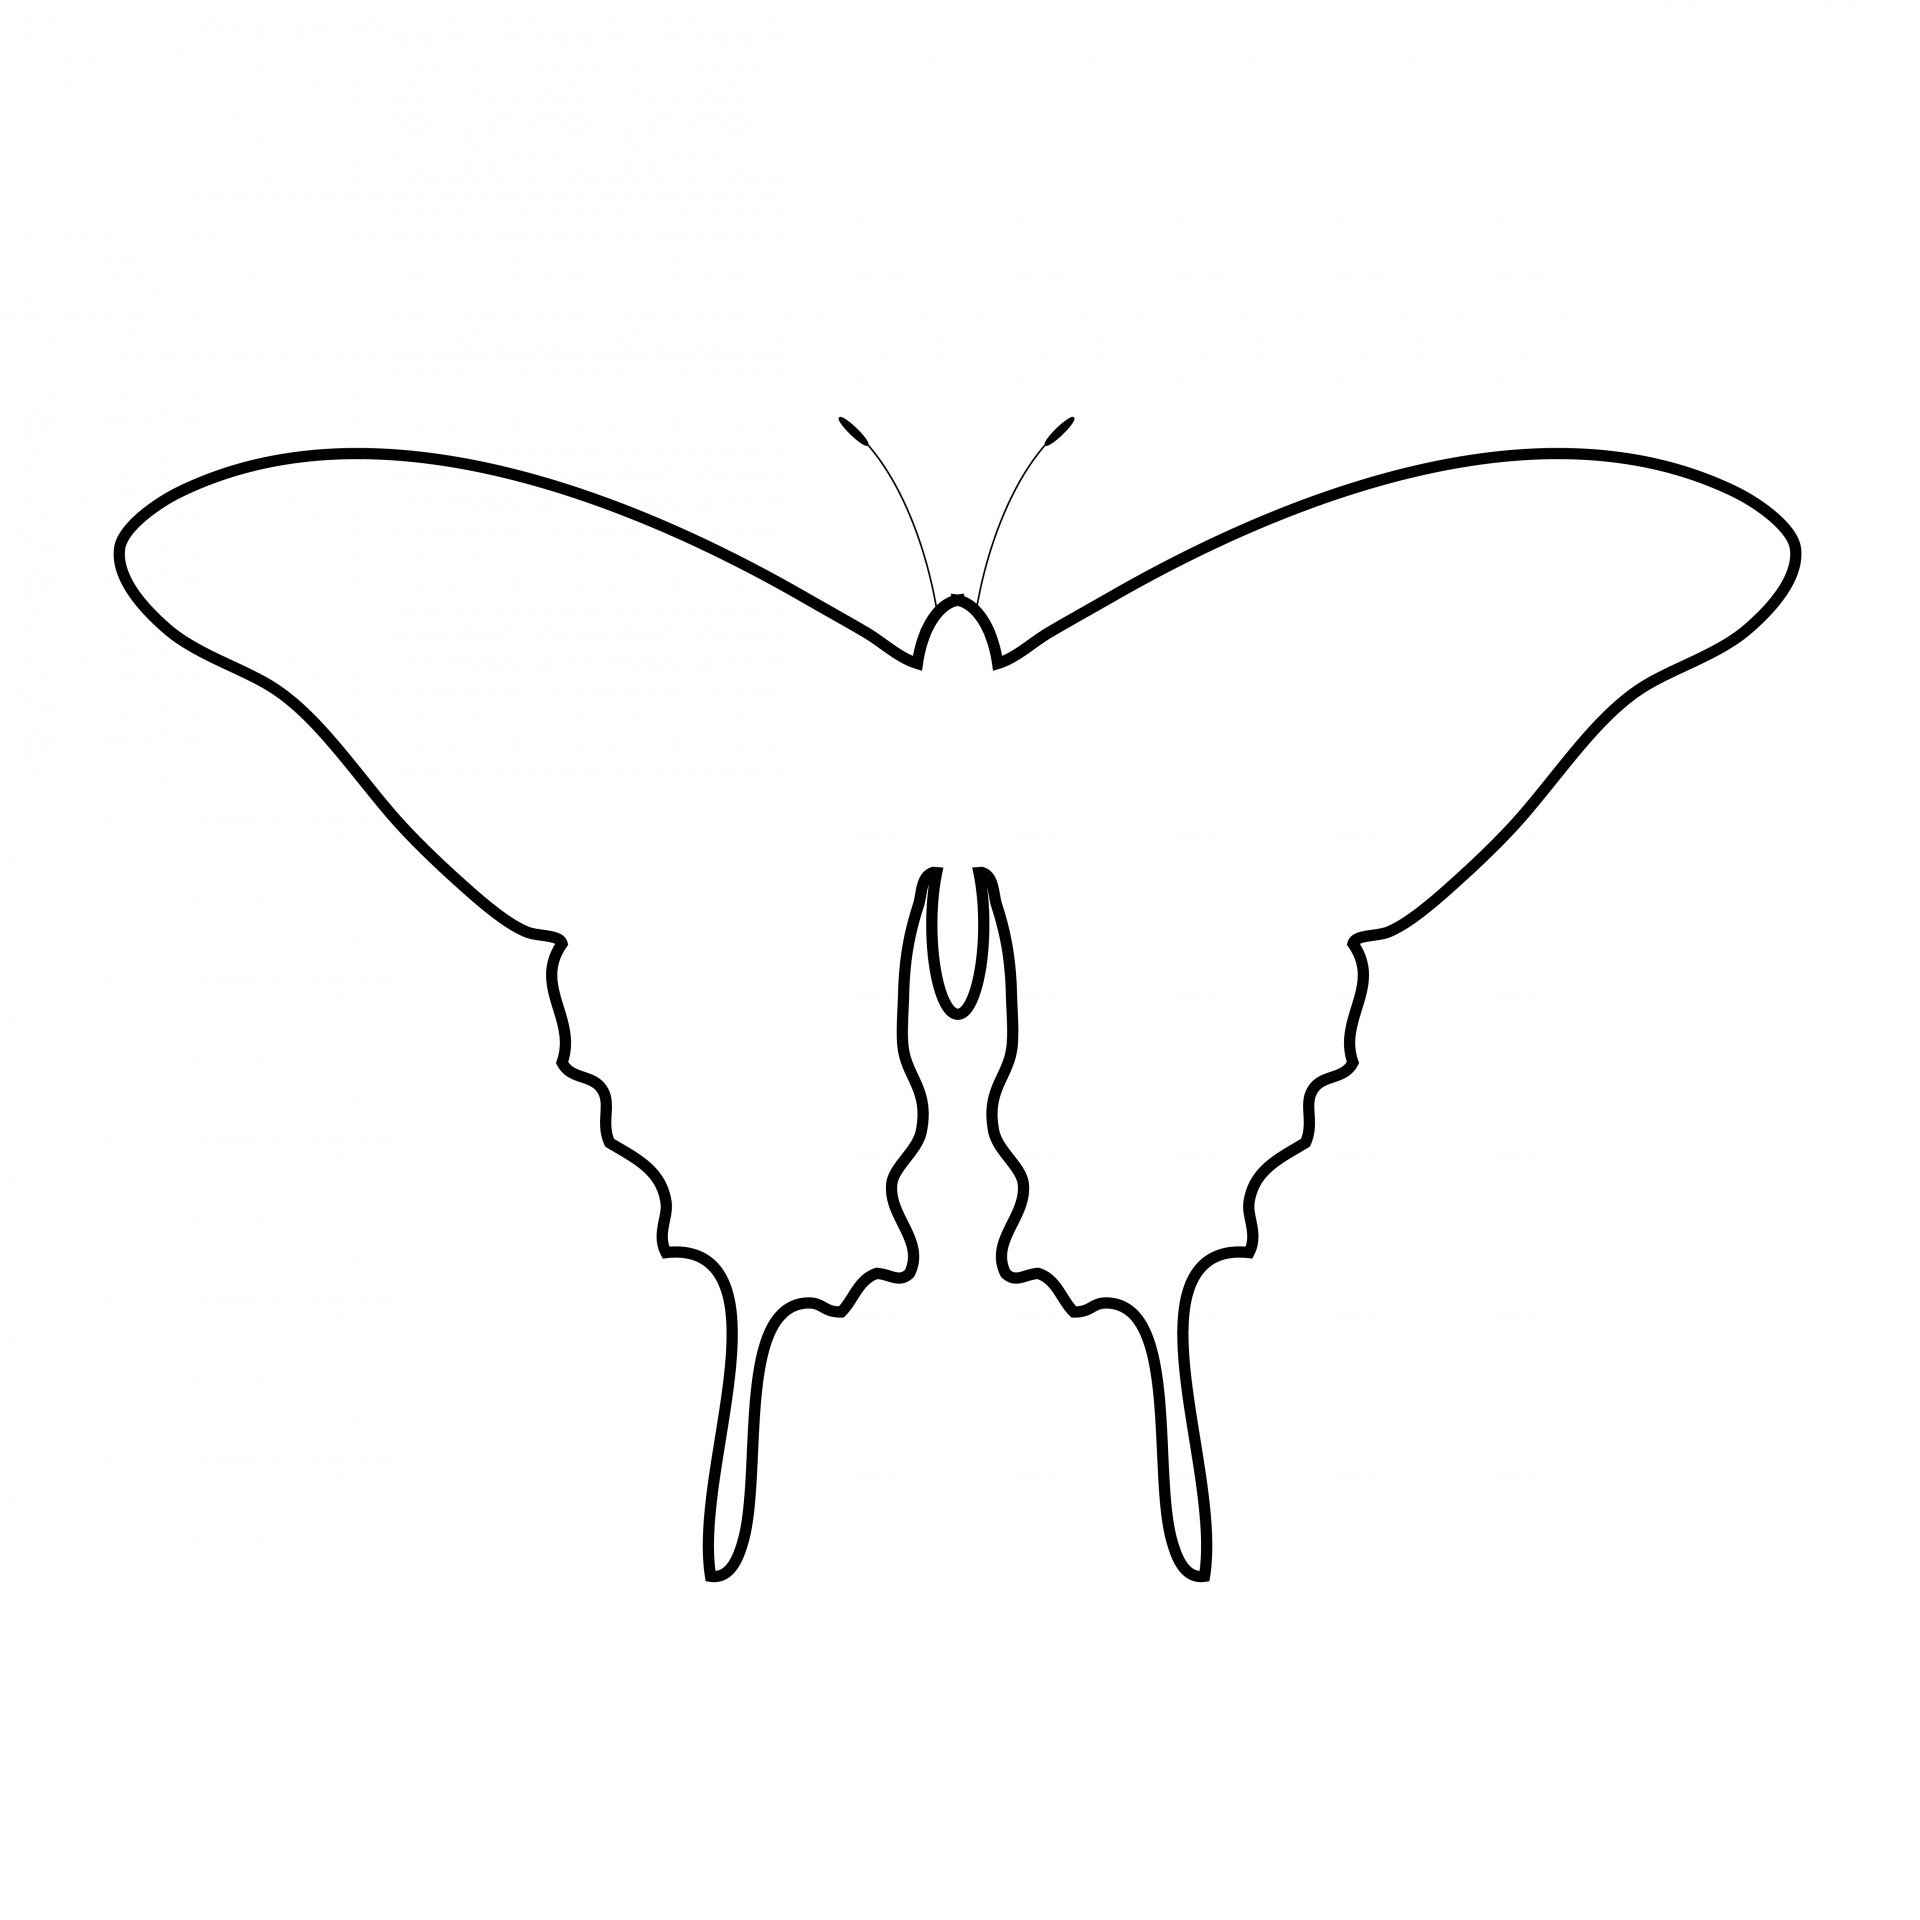 Butterfly Outline Coloring Page Butterfly Outline Gclipart